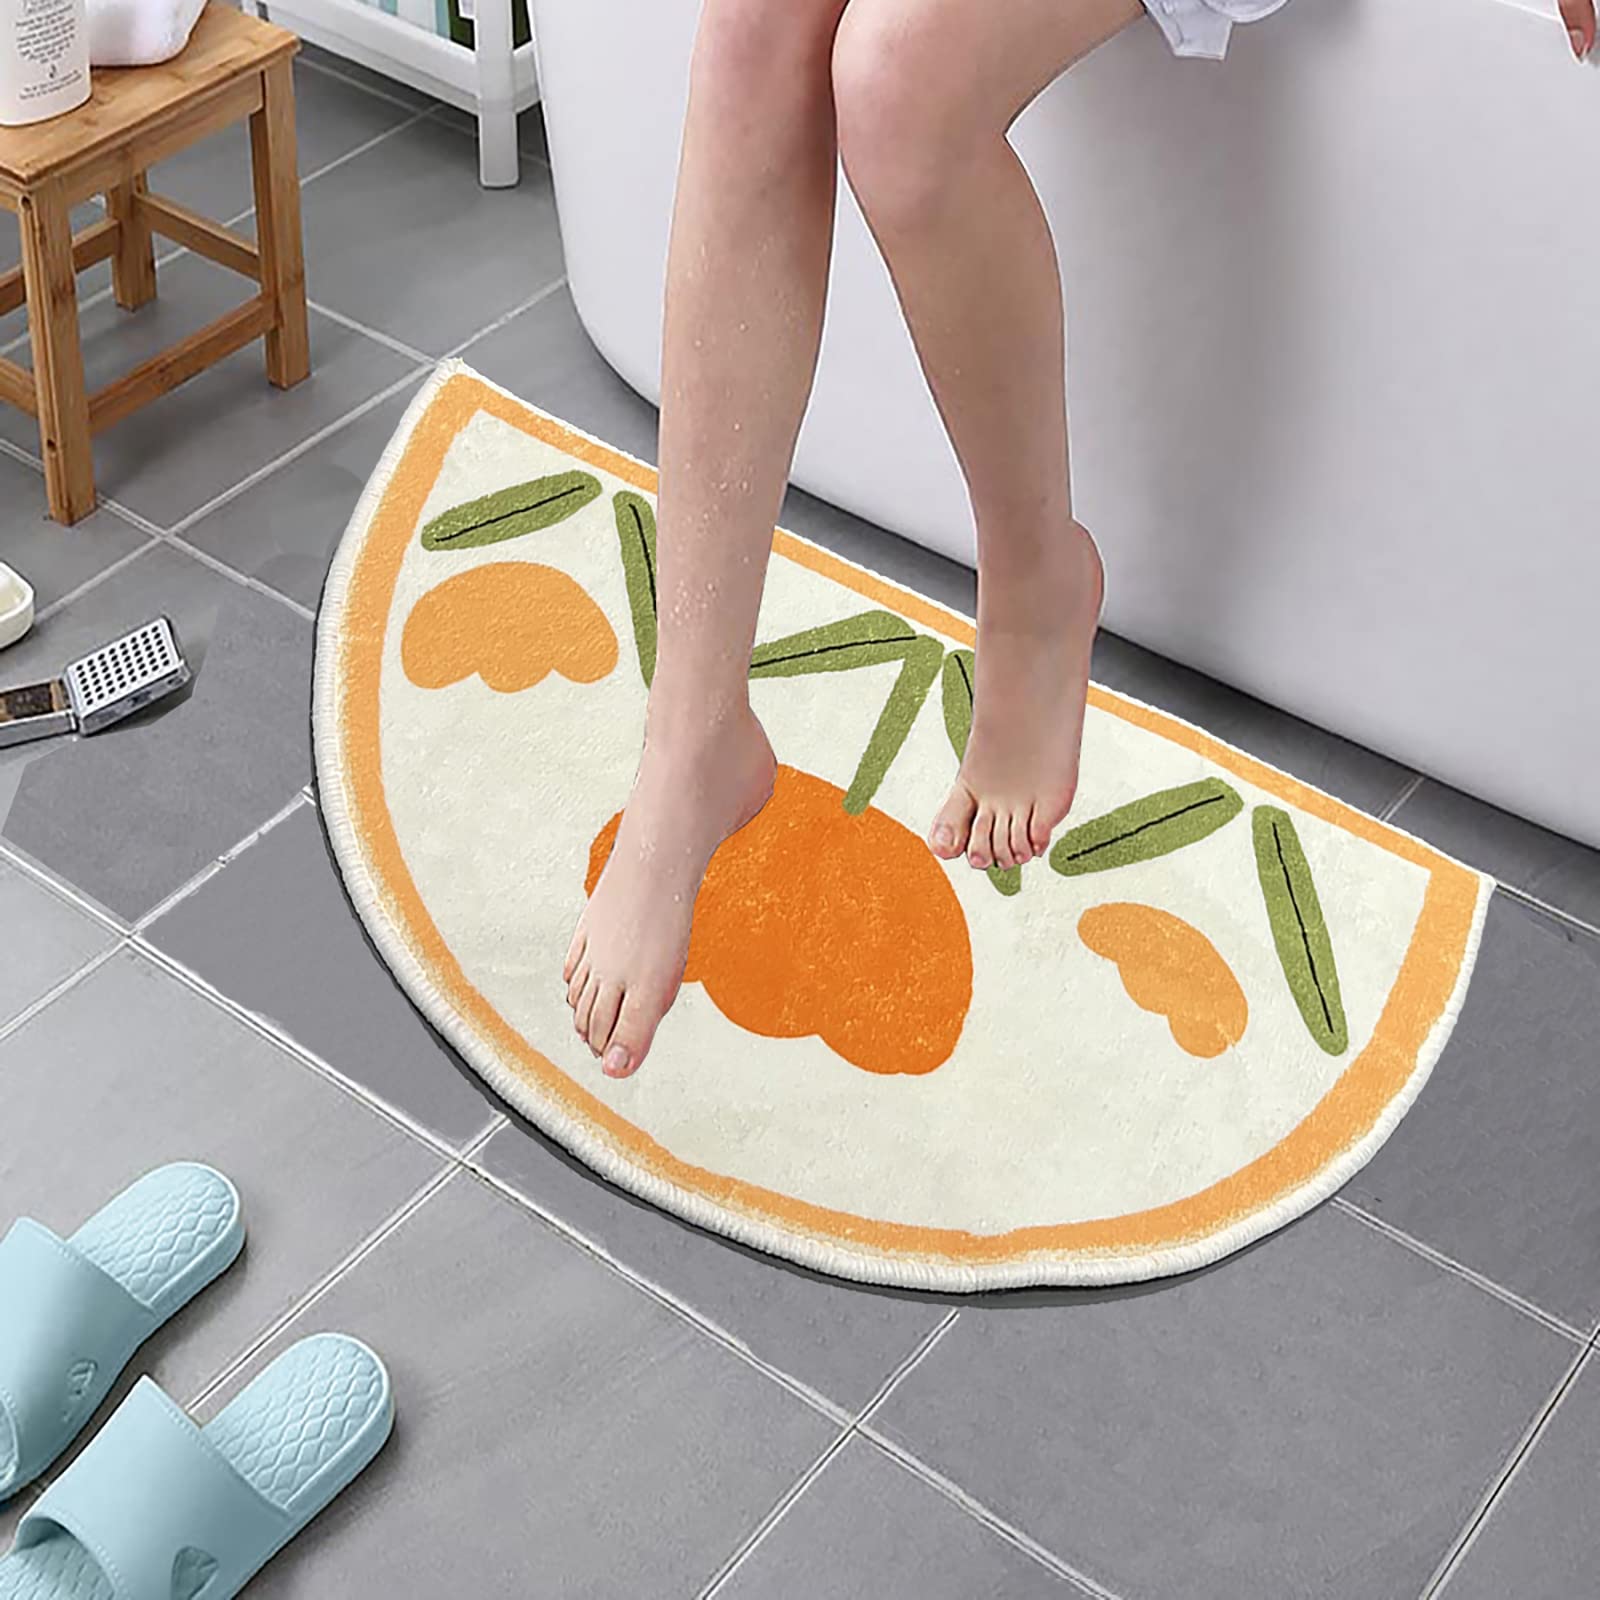 Half Circle Bath Mat Flower Bathroom Rug Non Slip Water Absorbent Super Soft Shaggy Machine Washable Dry Extra Thick Doormat Perfect Absorbant Plush Carpet (24”x16”)